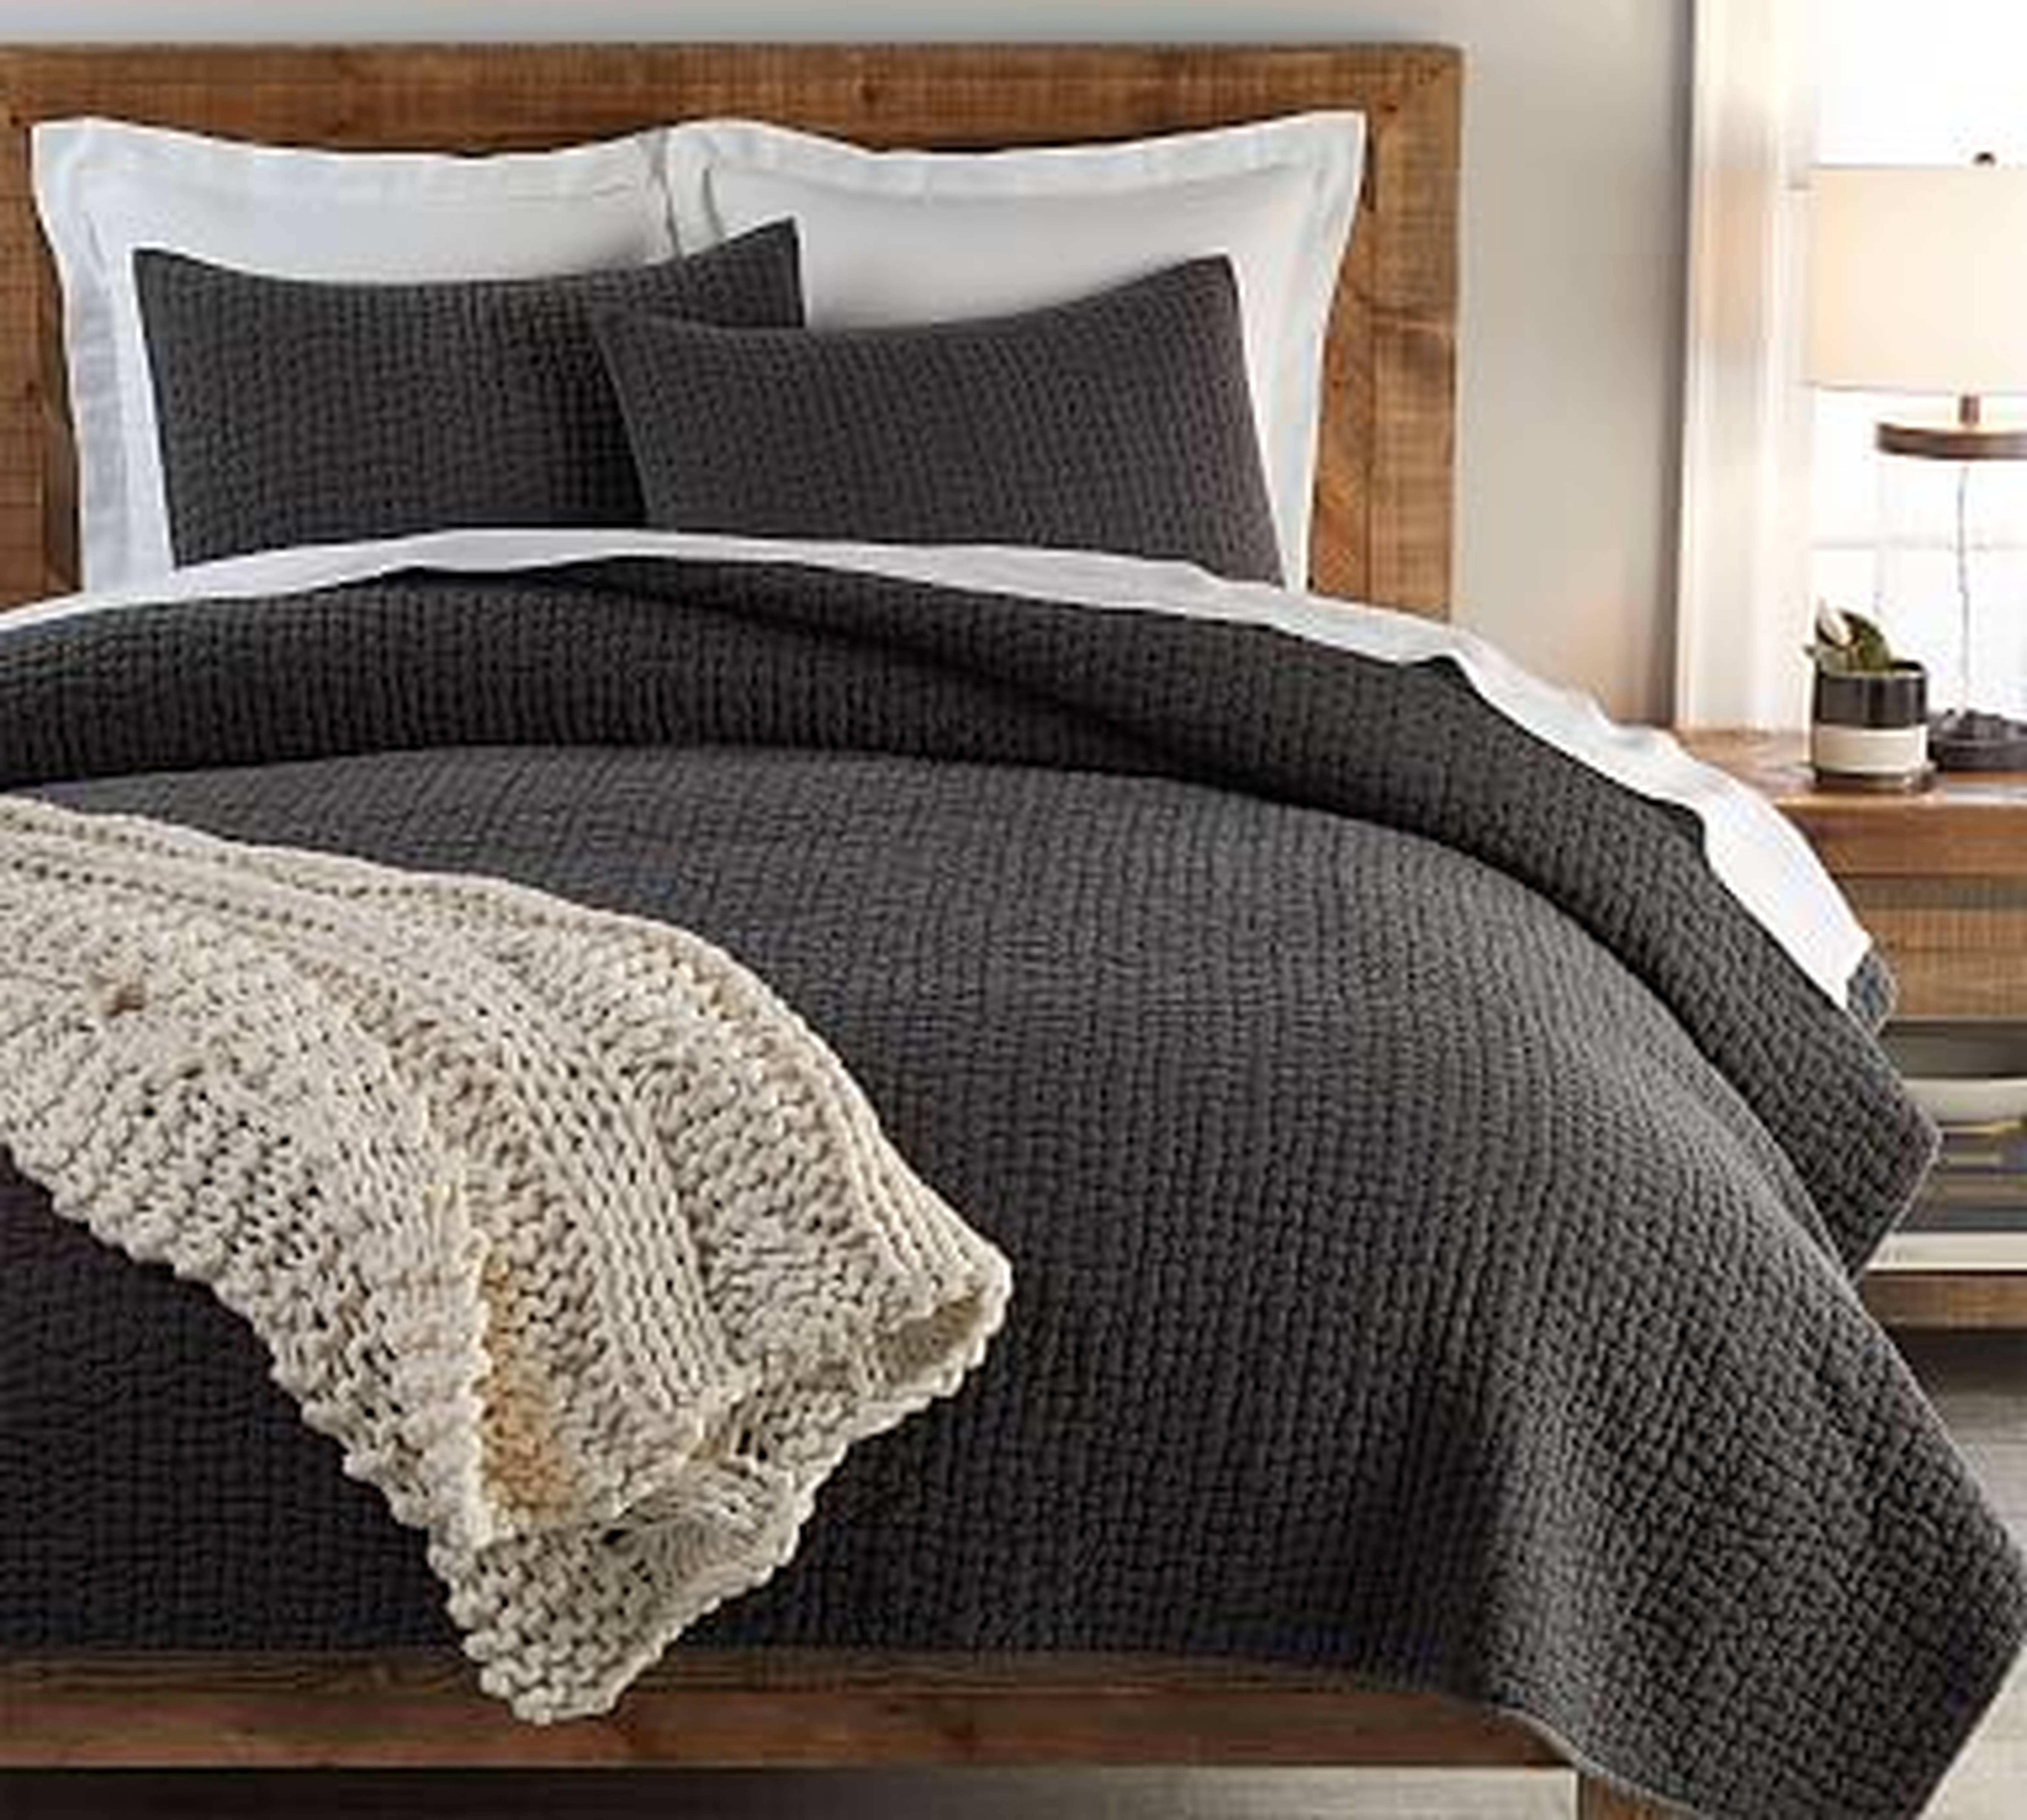 Stonewashed Pickstitch Cotton Quilt, King/Cal. King, Shale - Pottery Barn